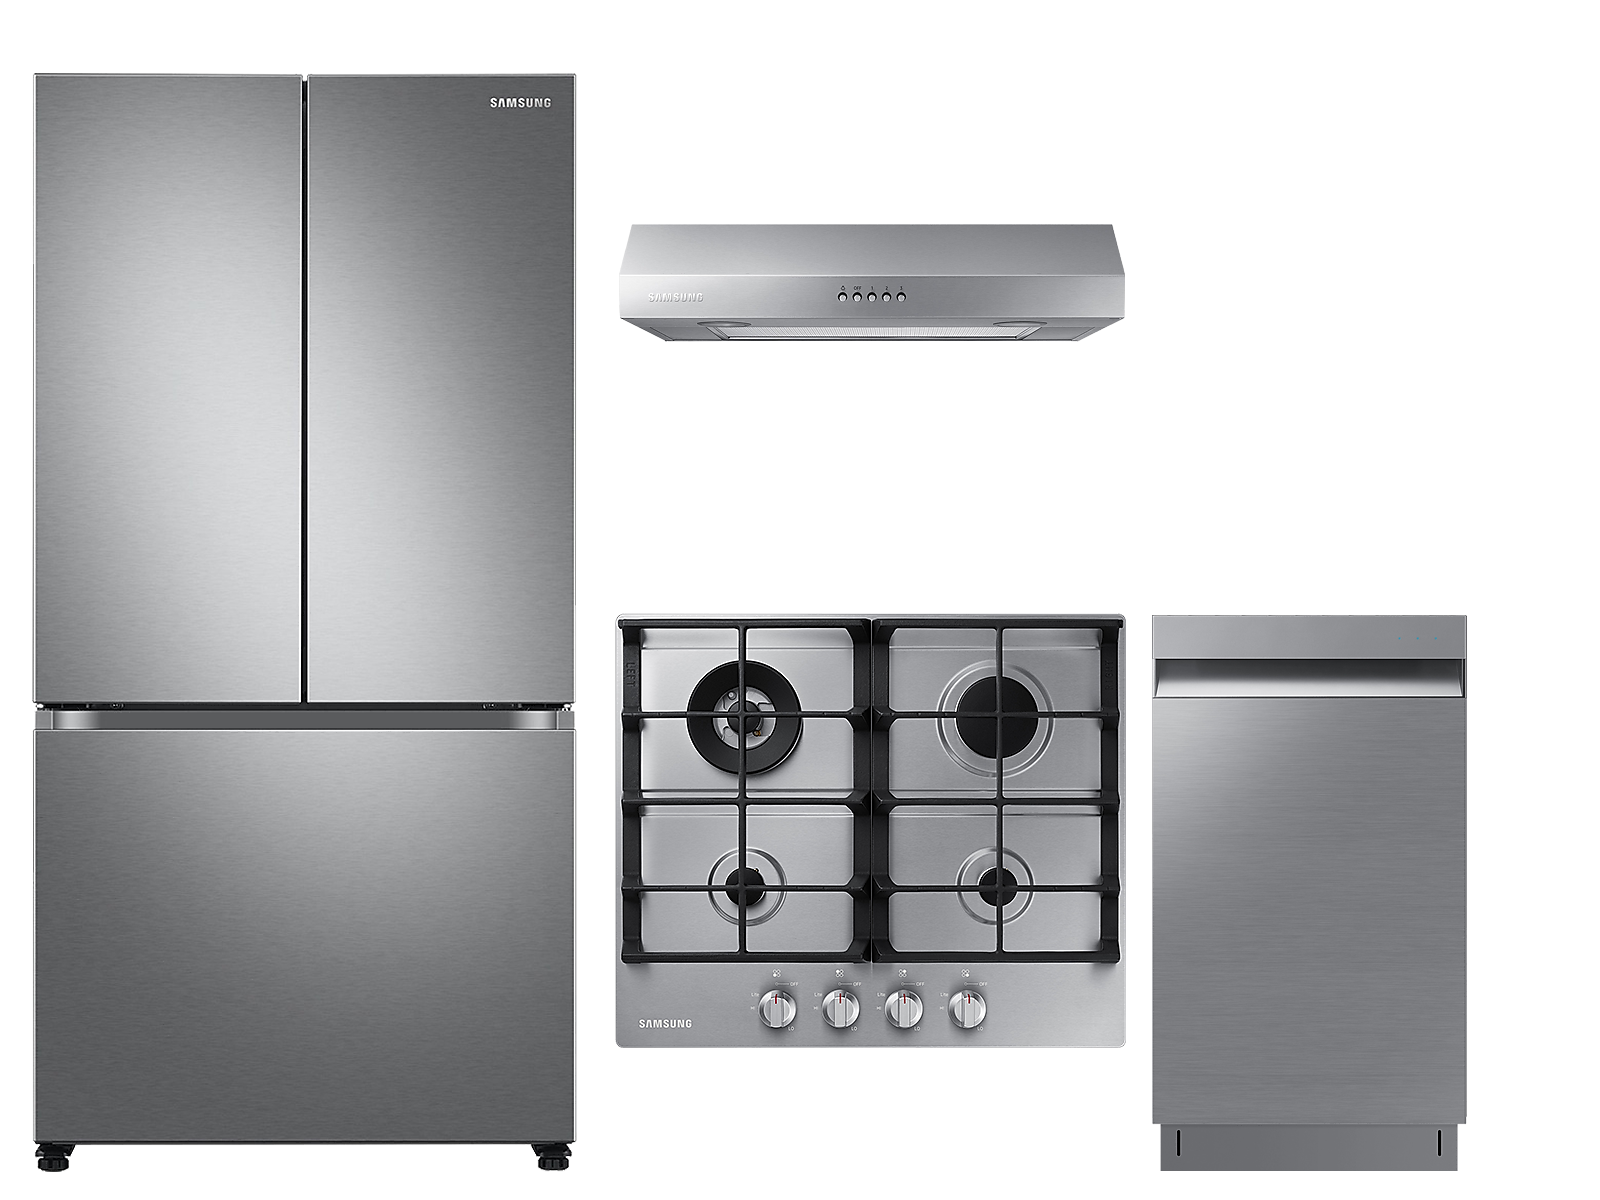 Samsung 3-Door French Door Refrigerator, gas cooktop, range hood and dishwaster small kitchen package in Stainless Steel(BNDL-1646291346728) photo